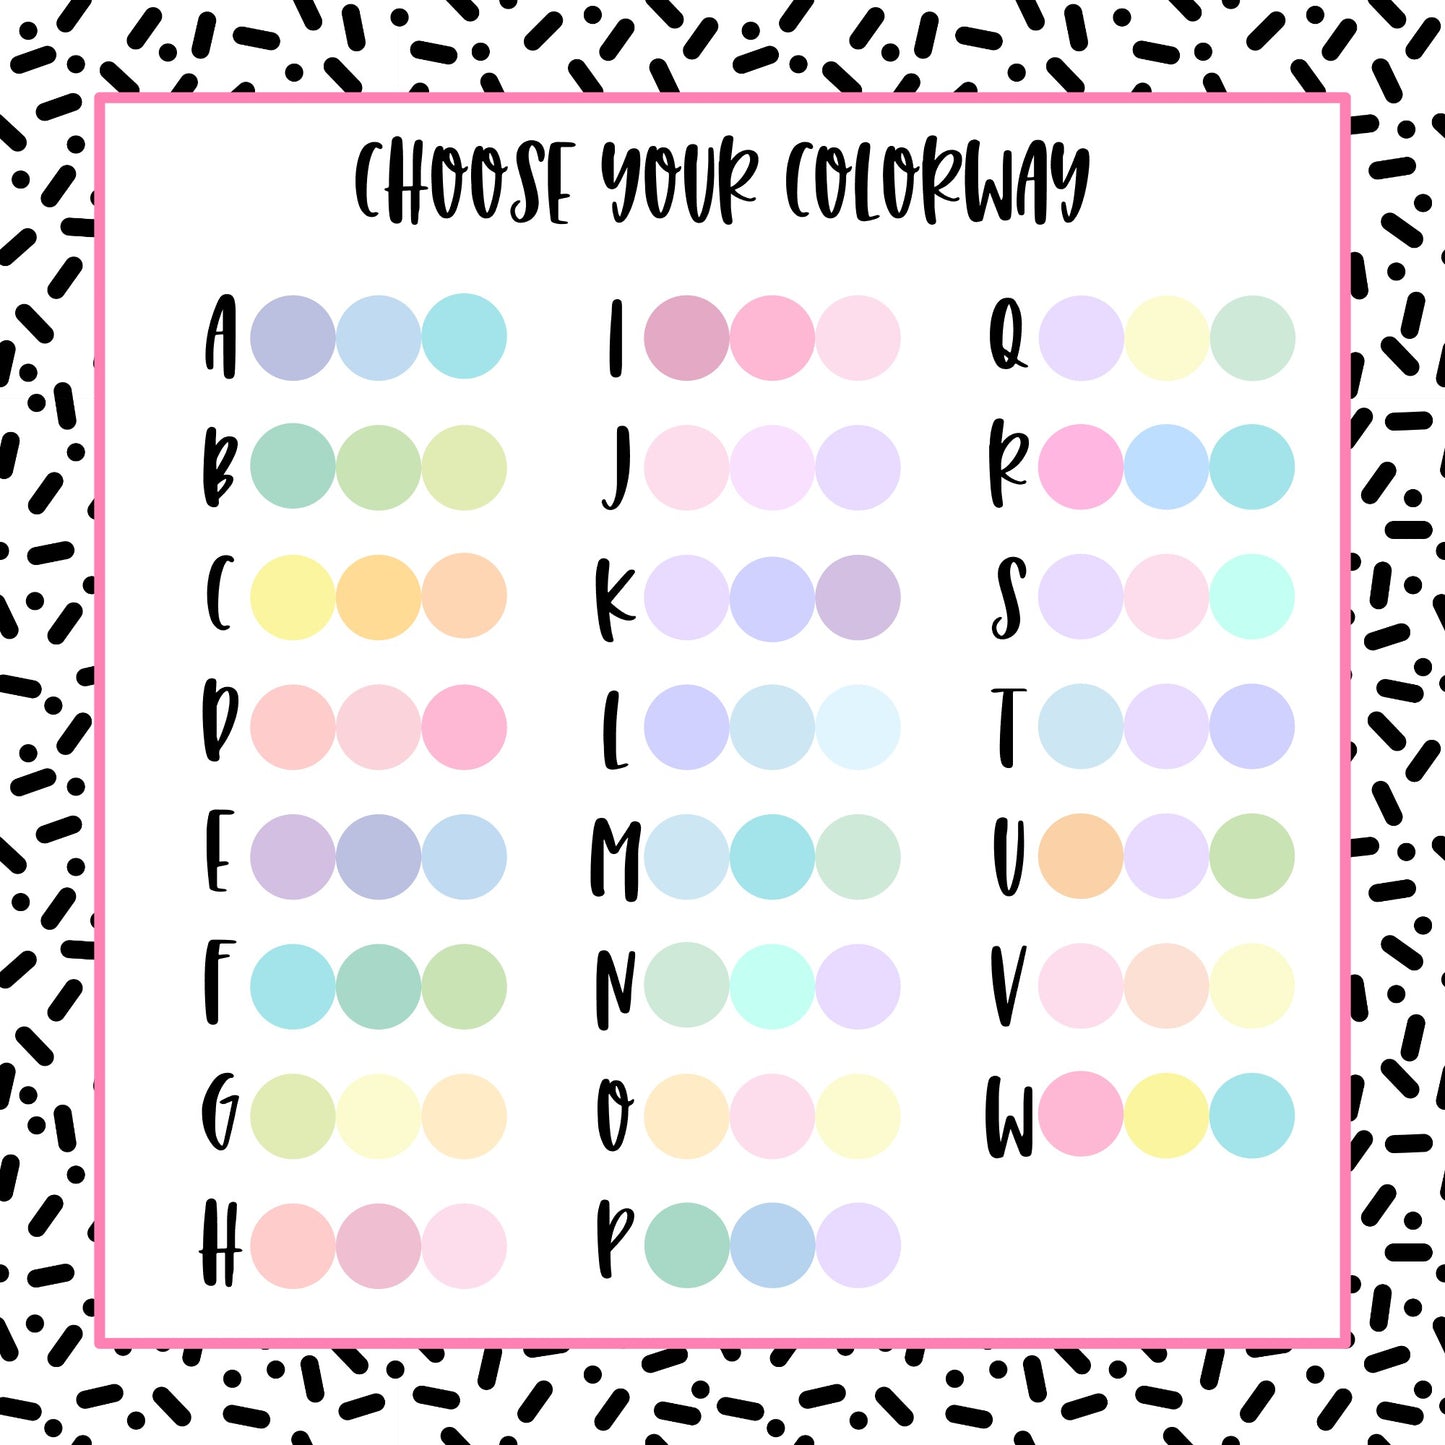 Pastel Shadowed Boxes - 23 color options